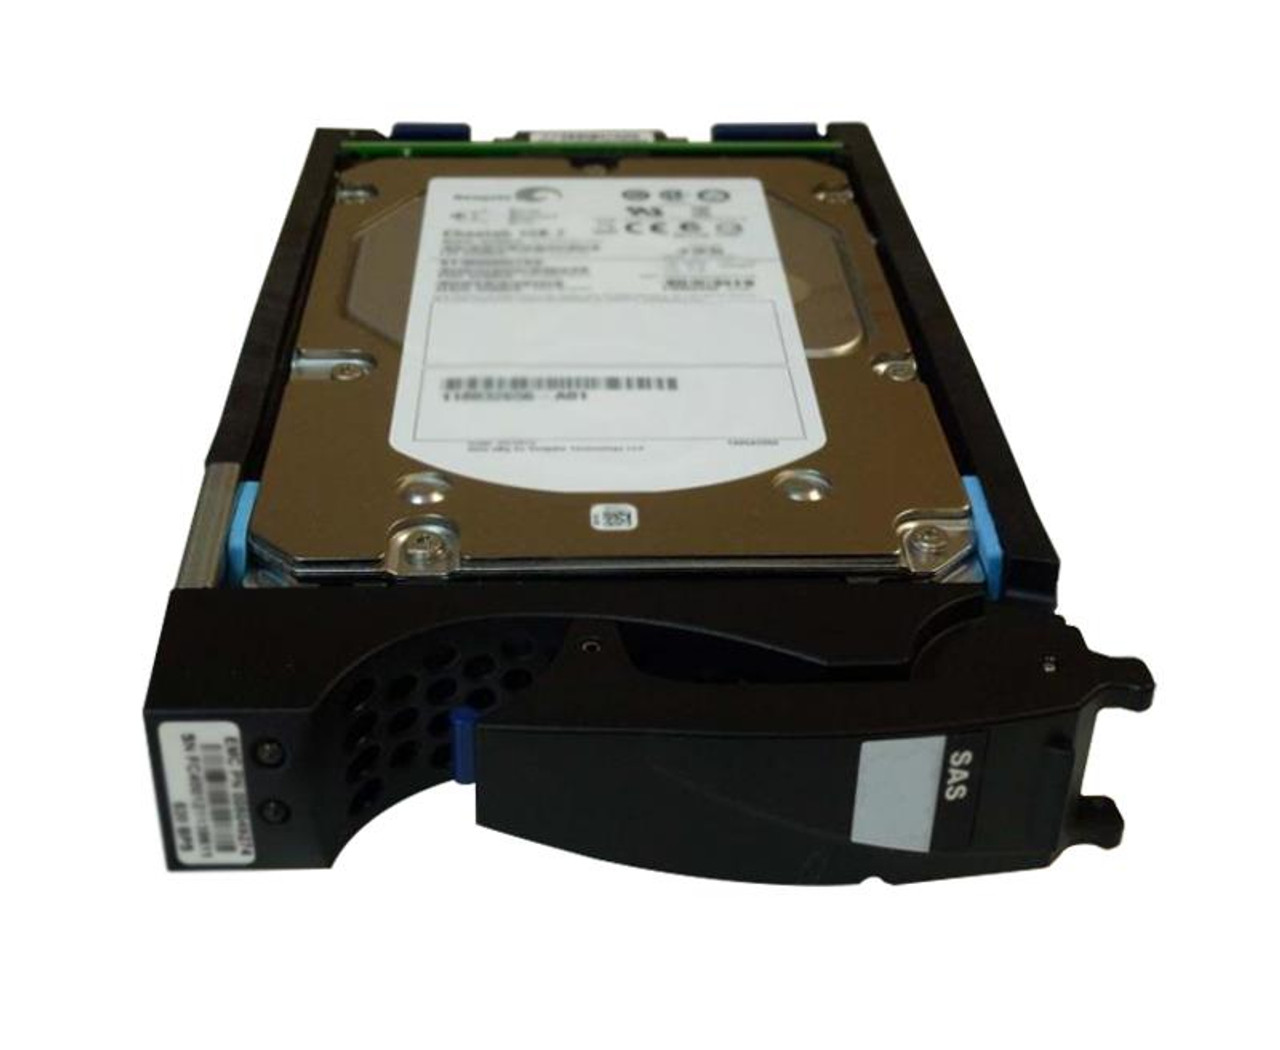 005050220 EMC 450GB 10000RPM Fibre Channel 4Gbps 16MB Cache 3.5-inch Internal Hard Drive for CLARiiON CX4 Series Storage Systems